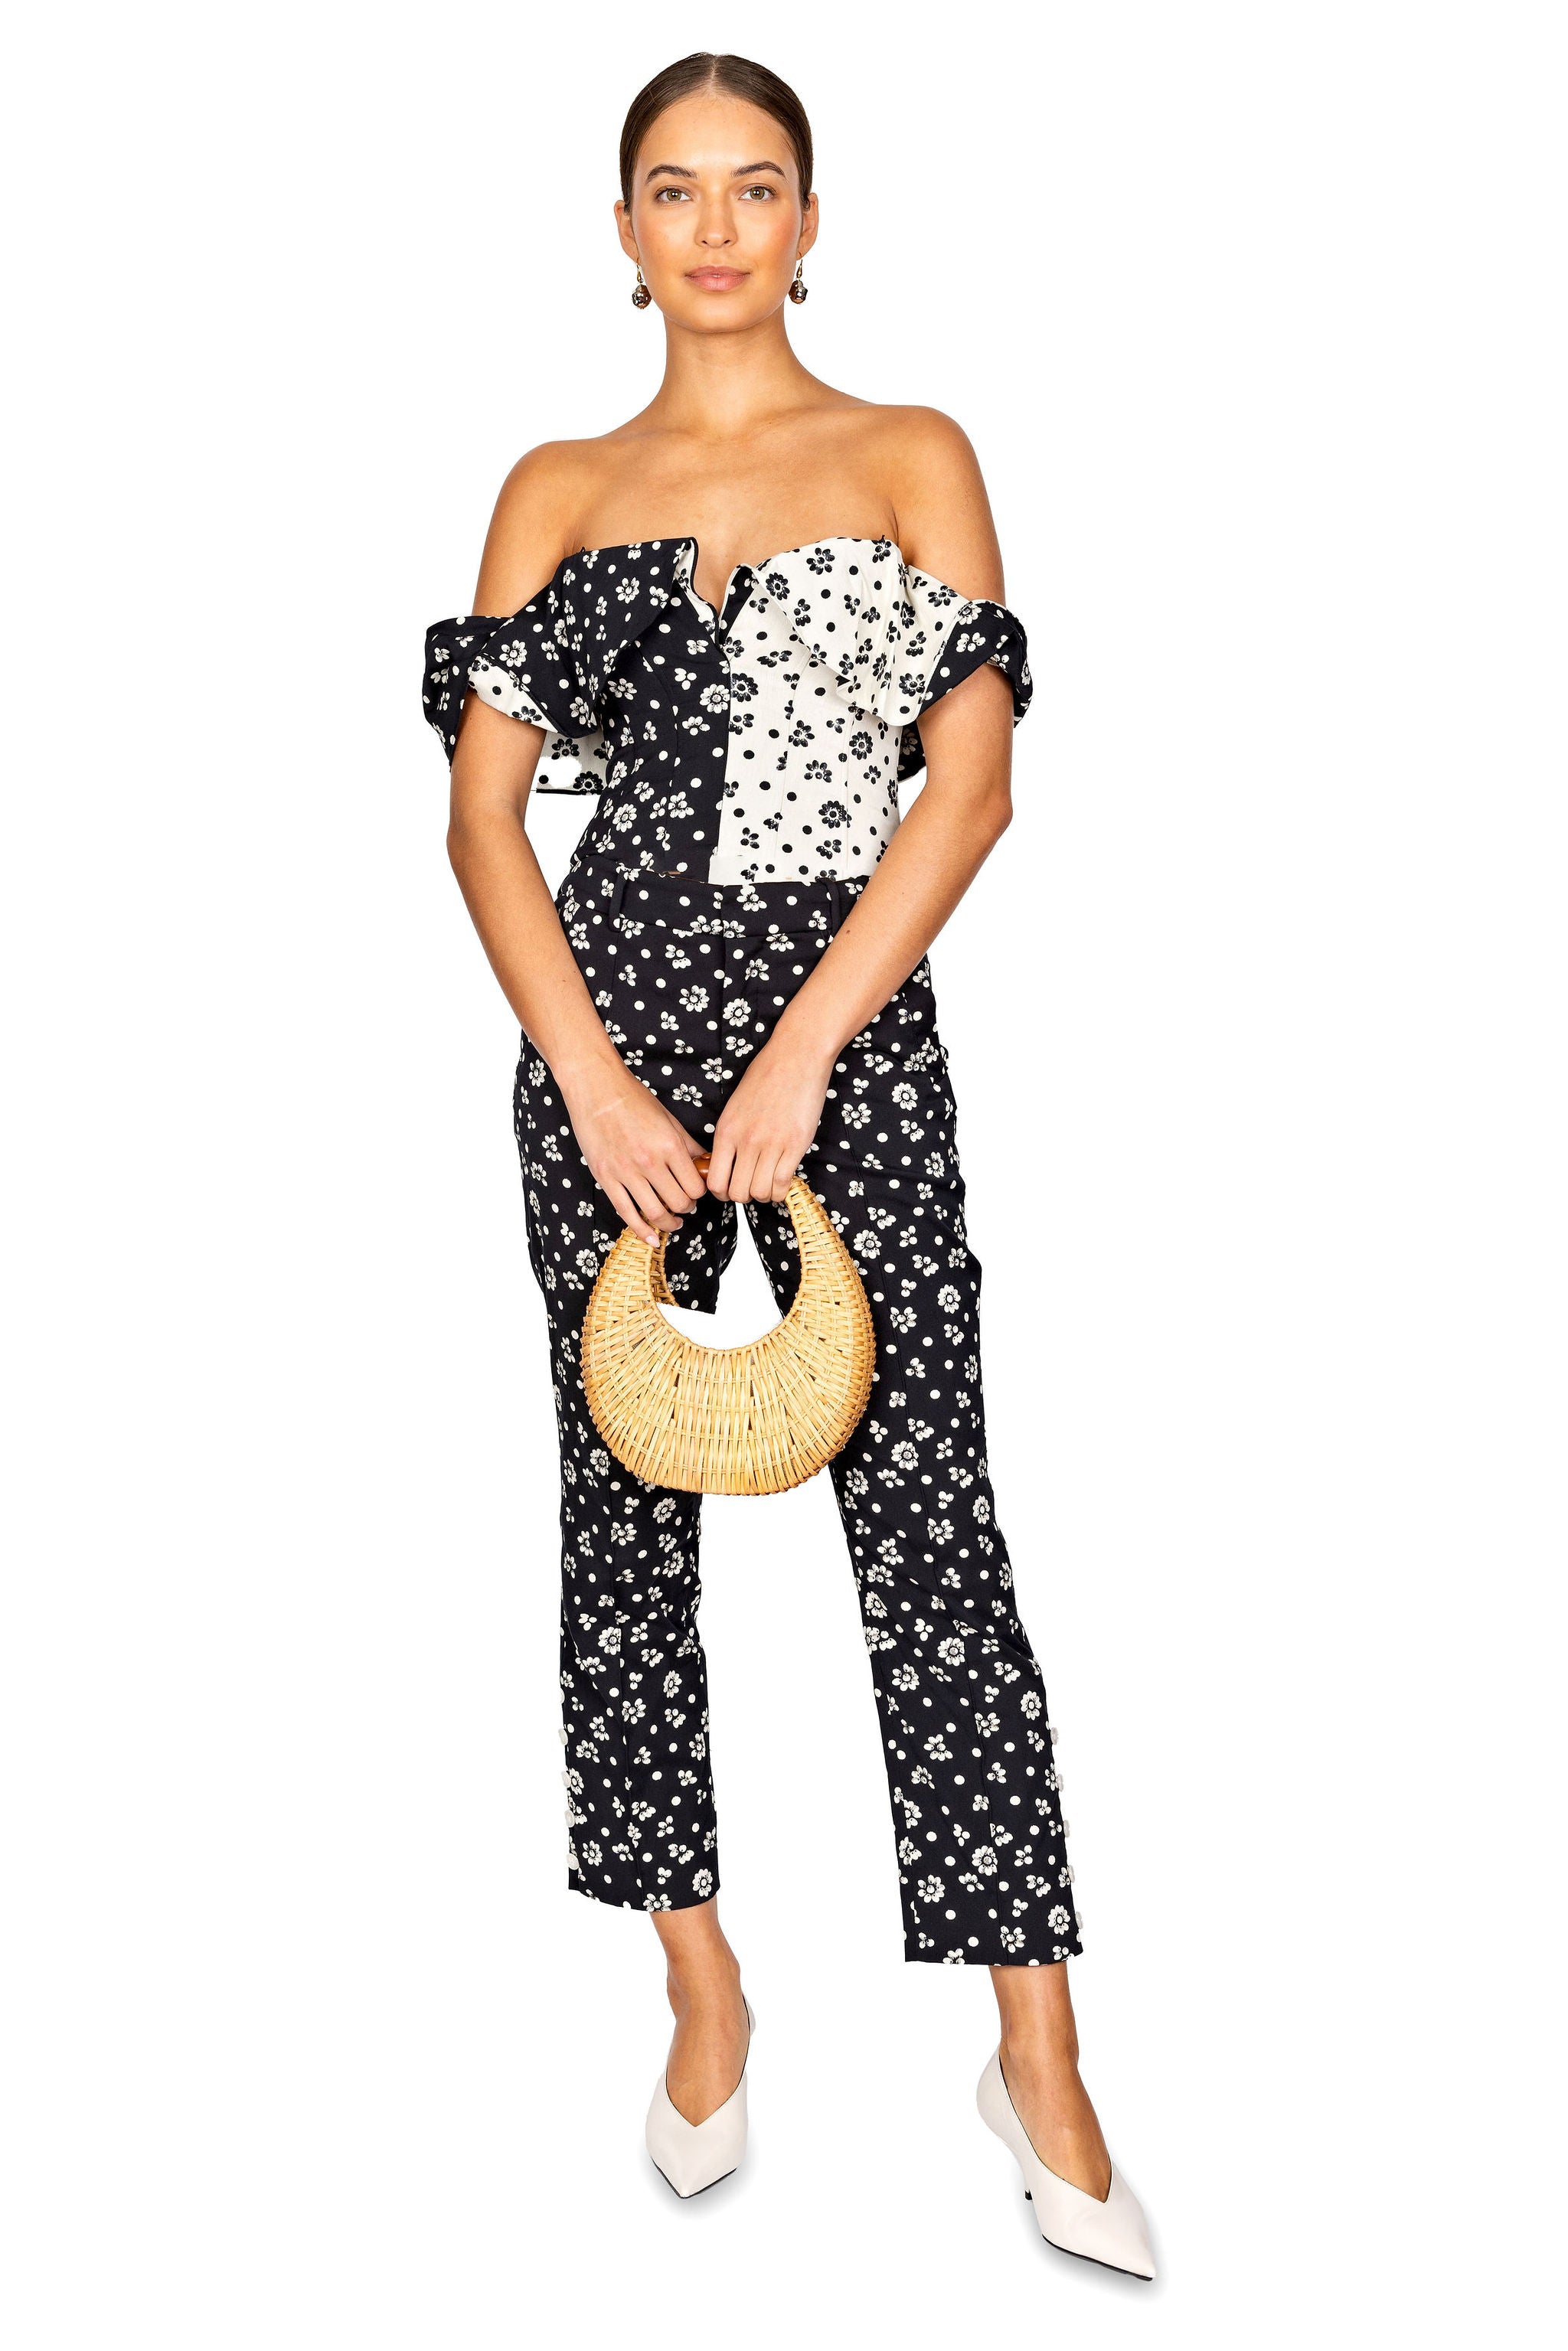 Model styled wearing the black and cream flat around the edges off the shoulder top with a round wicker handbag.